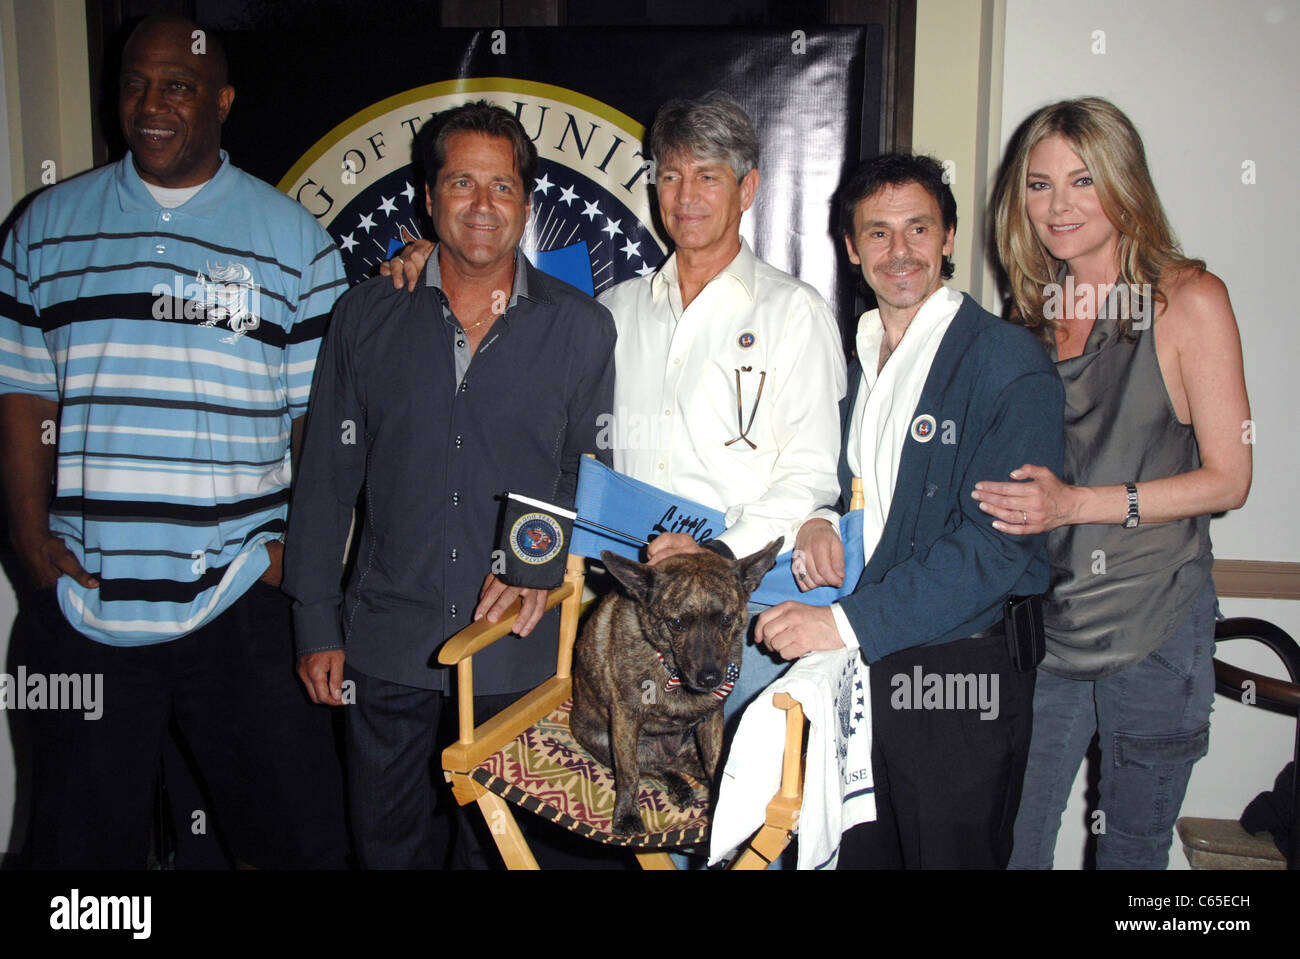 Tiny Lister, Jimmy Van Patten, Bryan Michael Stoller, Eric Roberts, Paula DeVicq, Little Bear at arrivals for FIRST DOG Screening, Paramount Theatre, Los Angeles, CA June 22, 2010. Photo By: Dee Cercone/Everett Collection Stock Photo